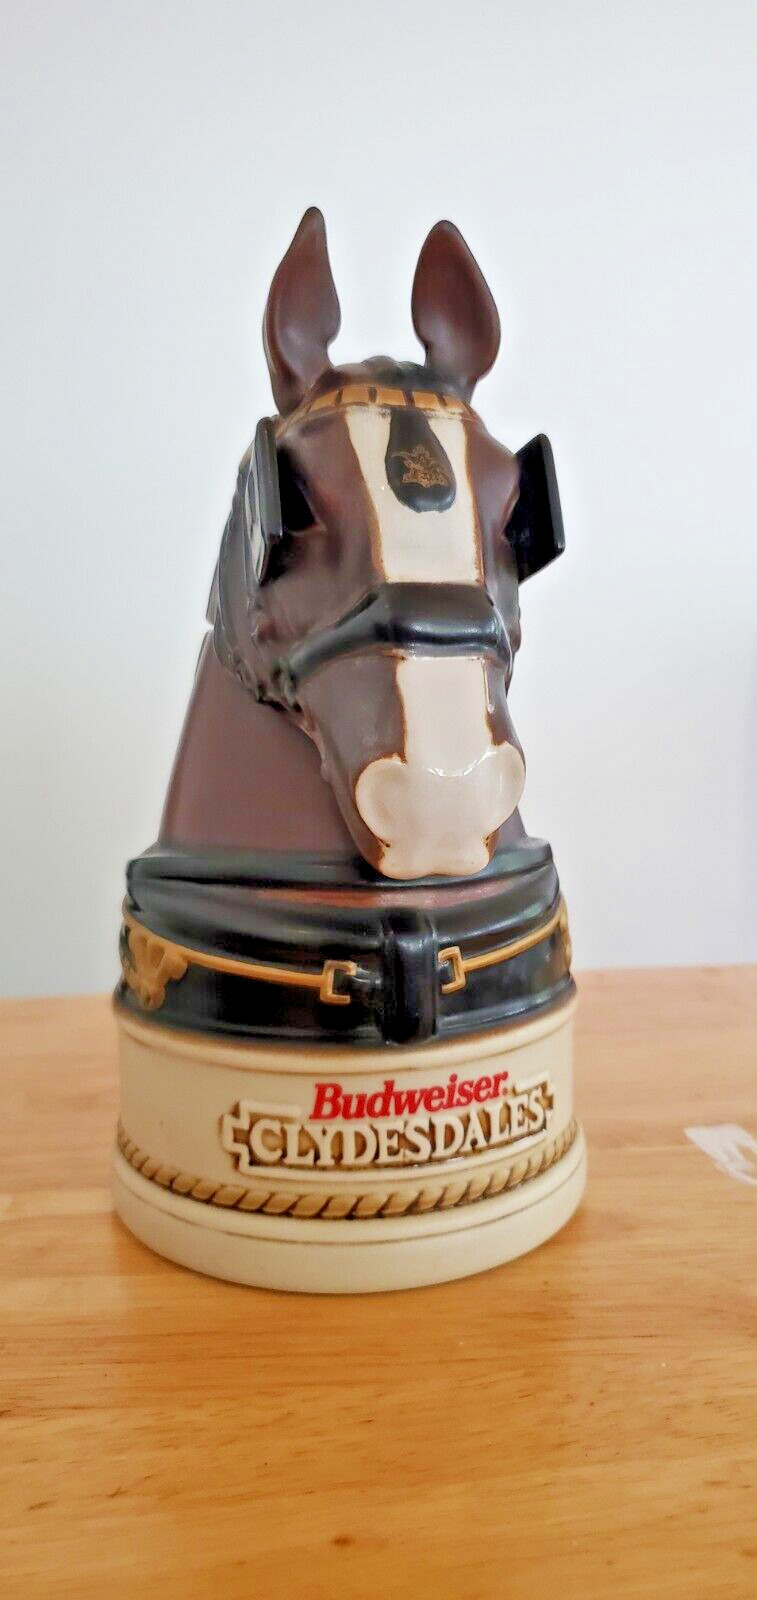 1995 World Famous Budweiser Clydesdale Stein *GREAT CONDITION*